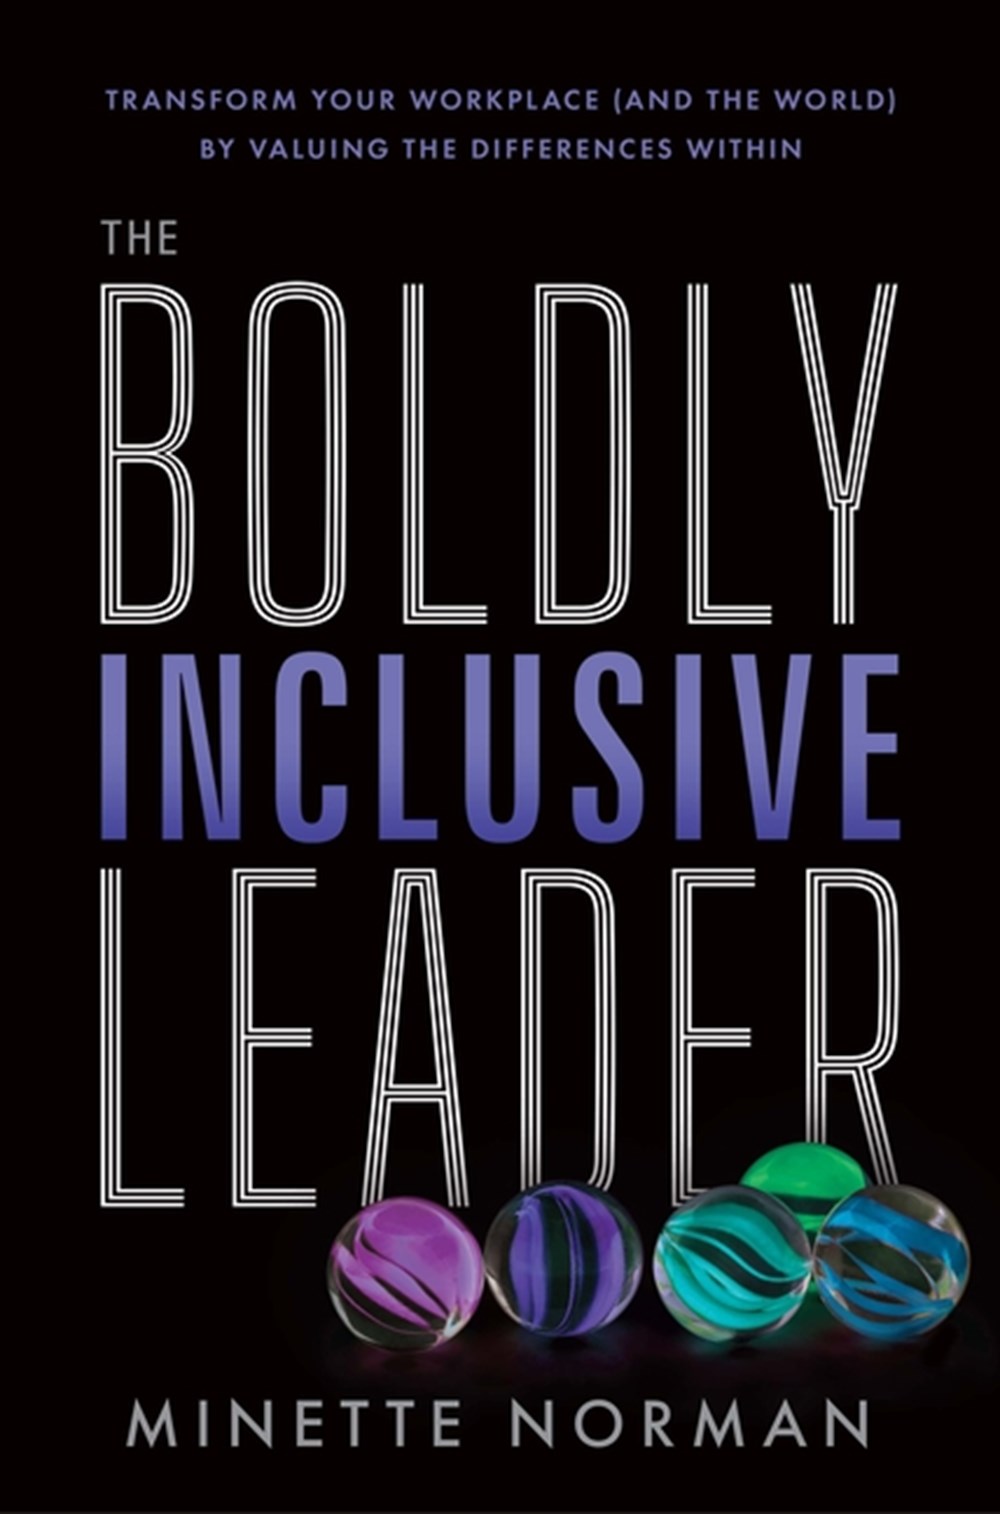 Boldly Inclusive Leader Transform Your Workplace (and the World) by Valuing the Differences Within